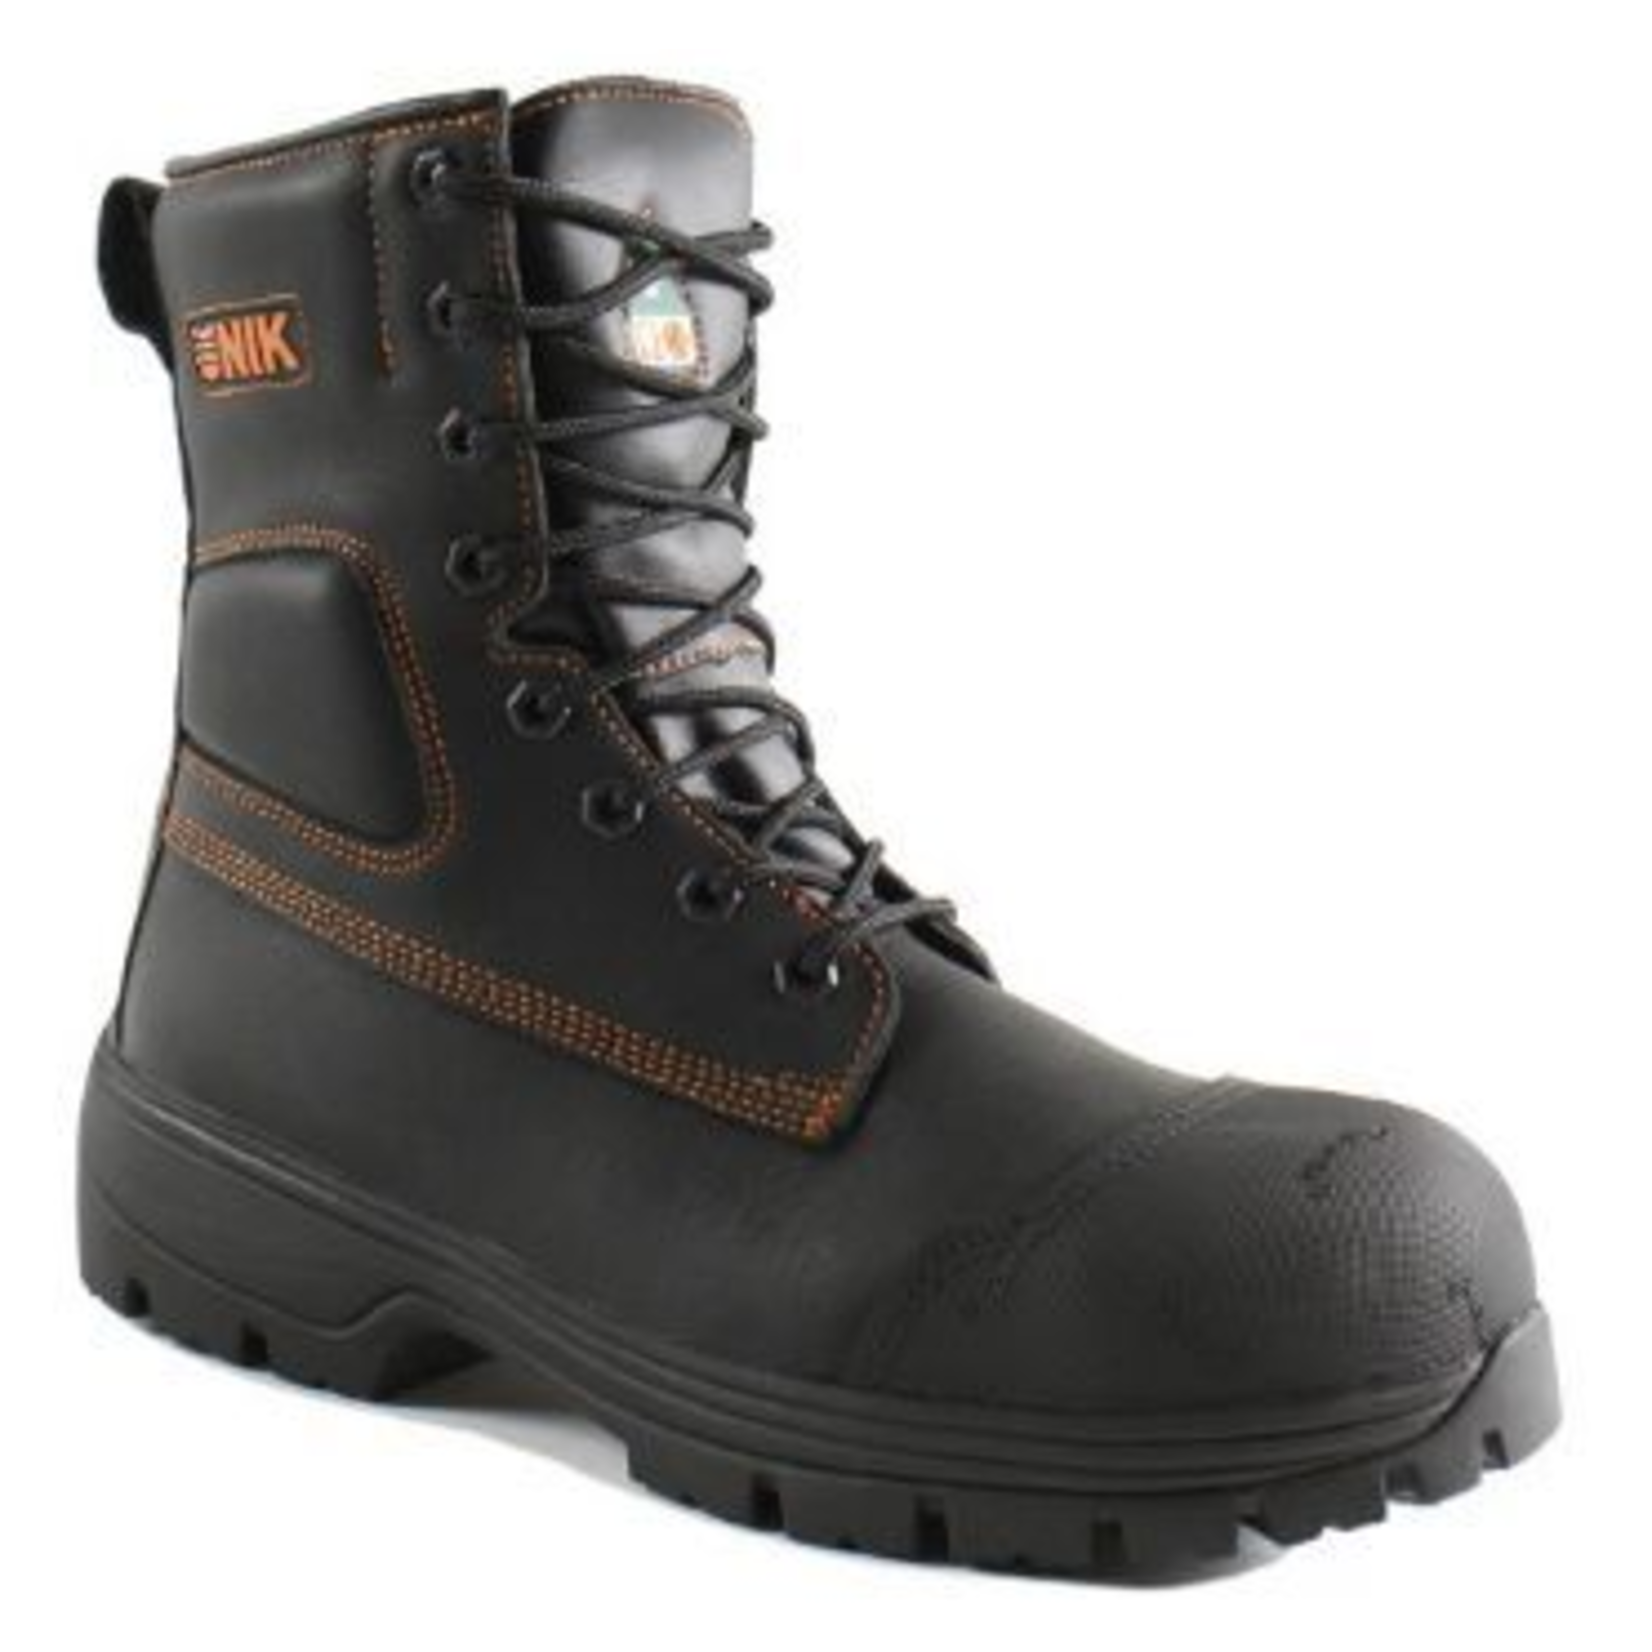 UNIK UNIK 8"Contractor Leather Safety Boot USF89401